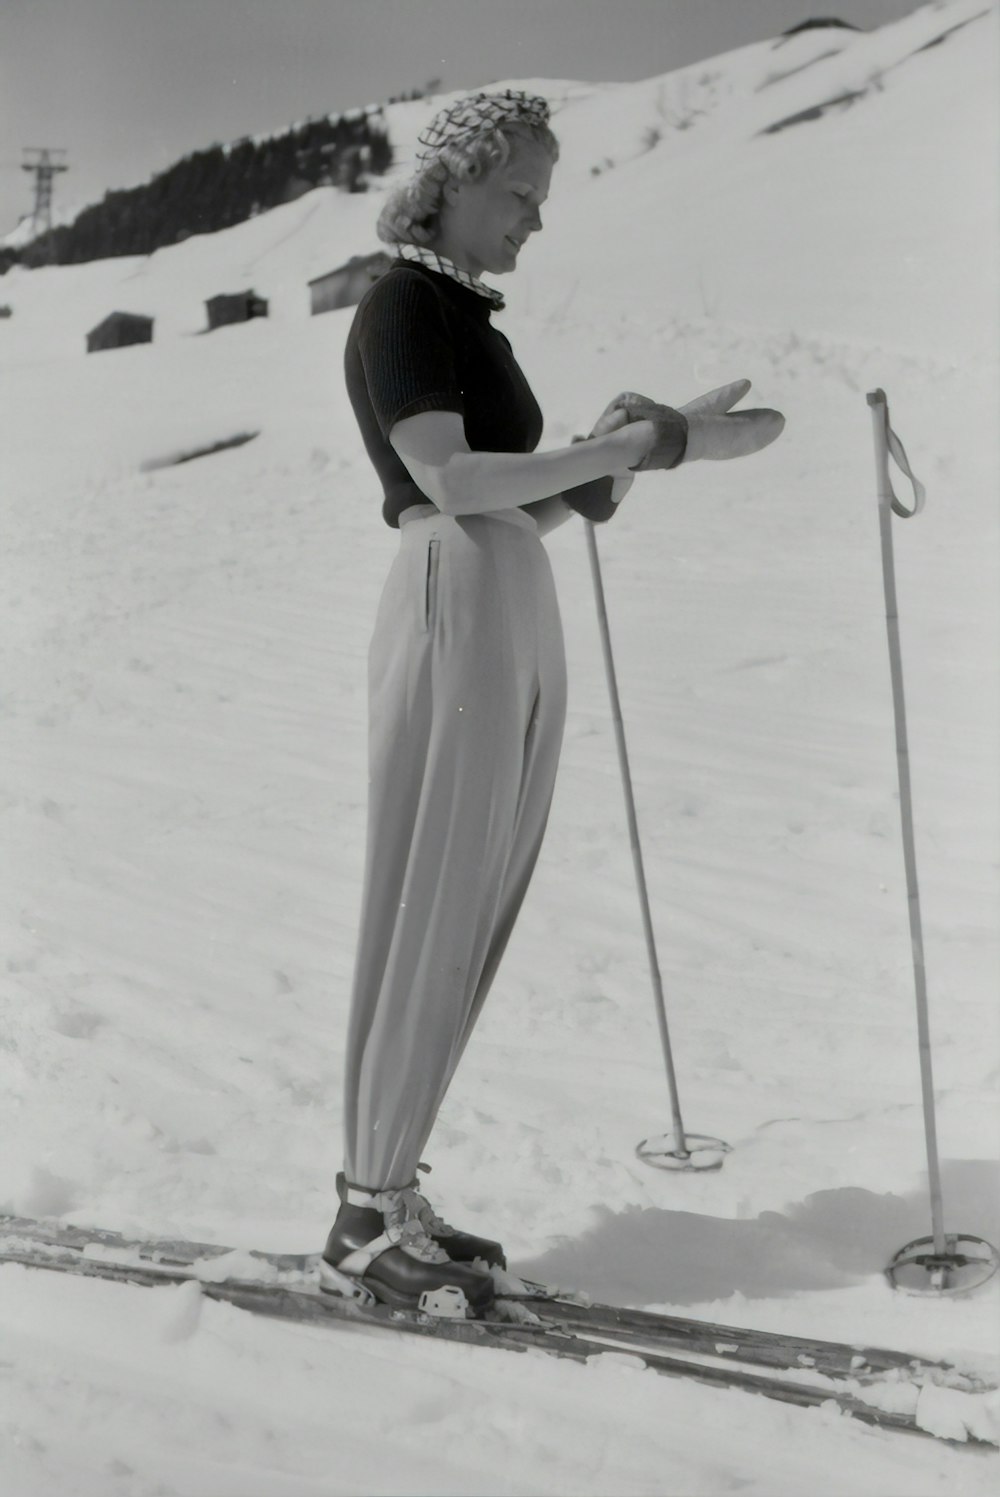 greyscale photography of woman using snowboard